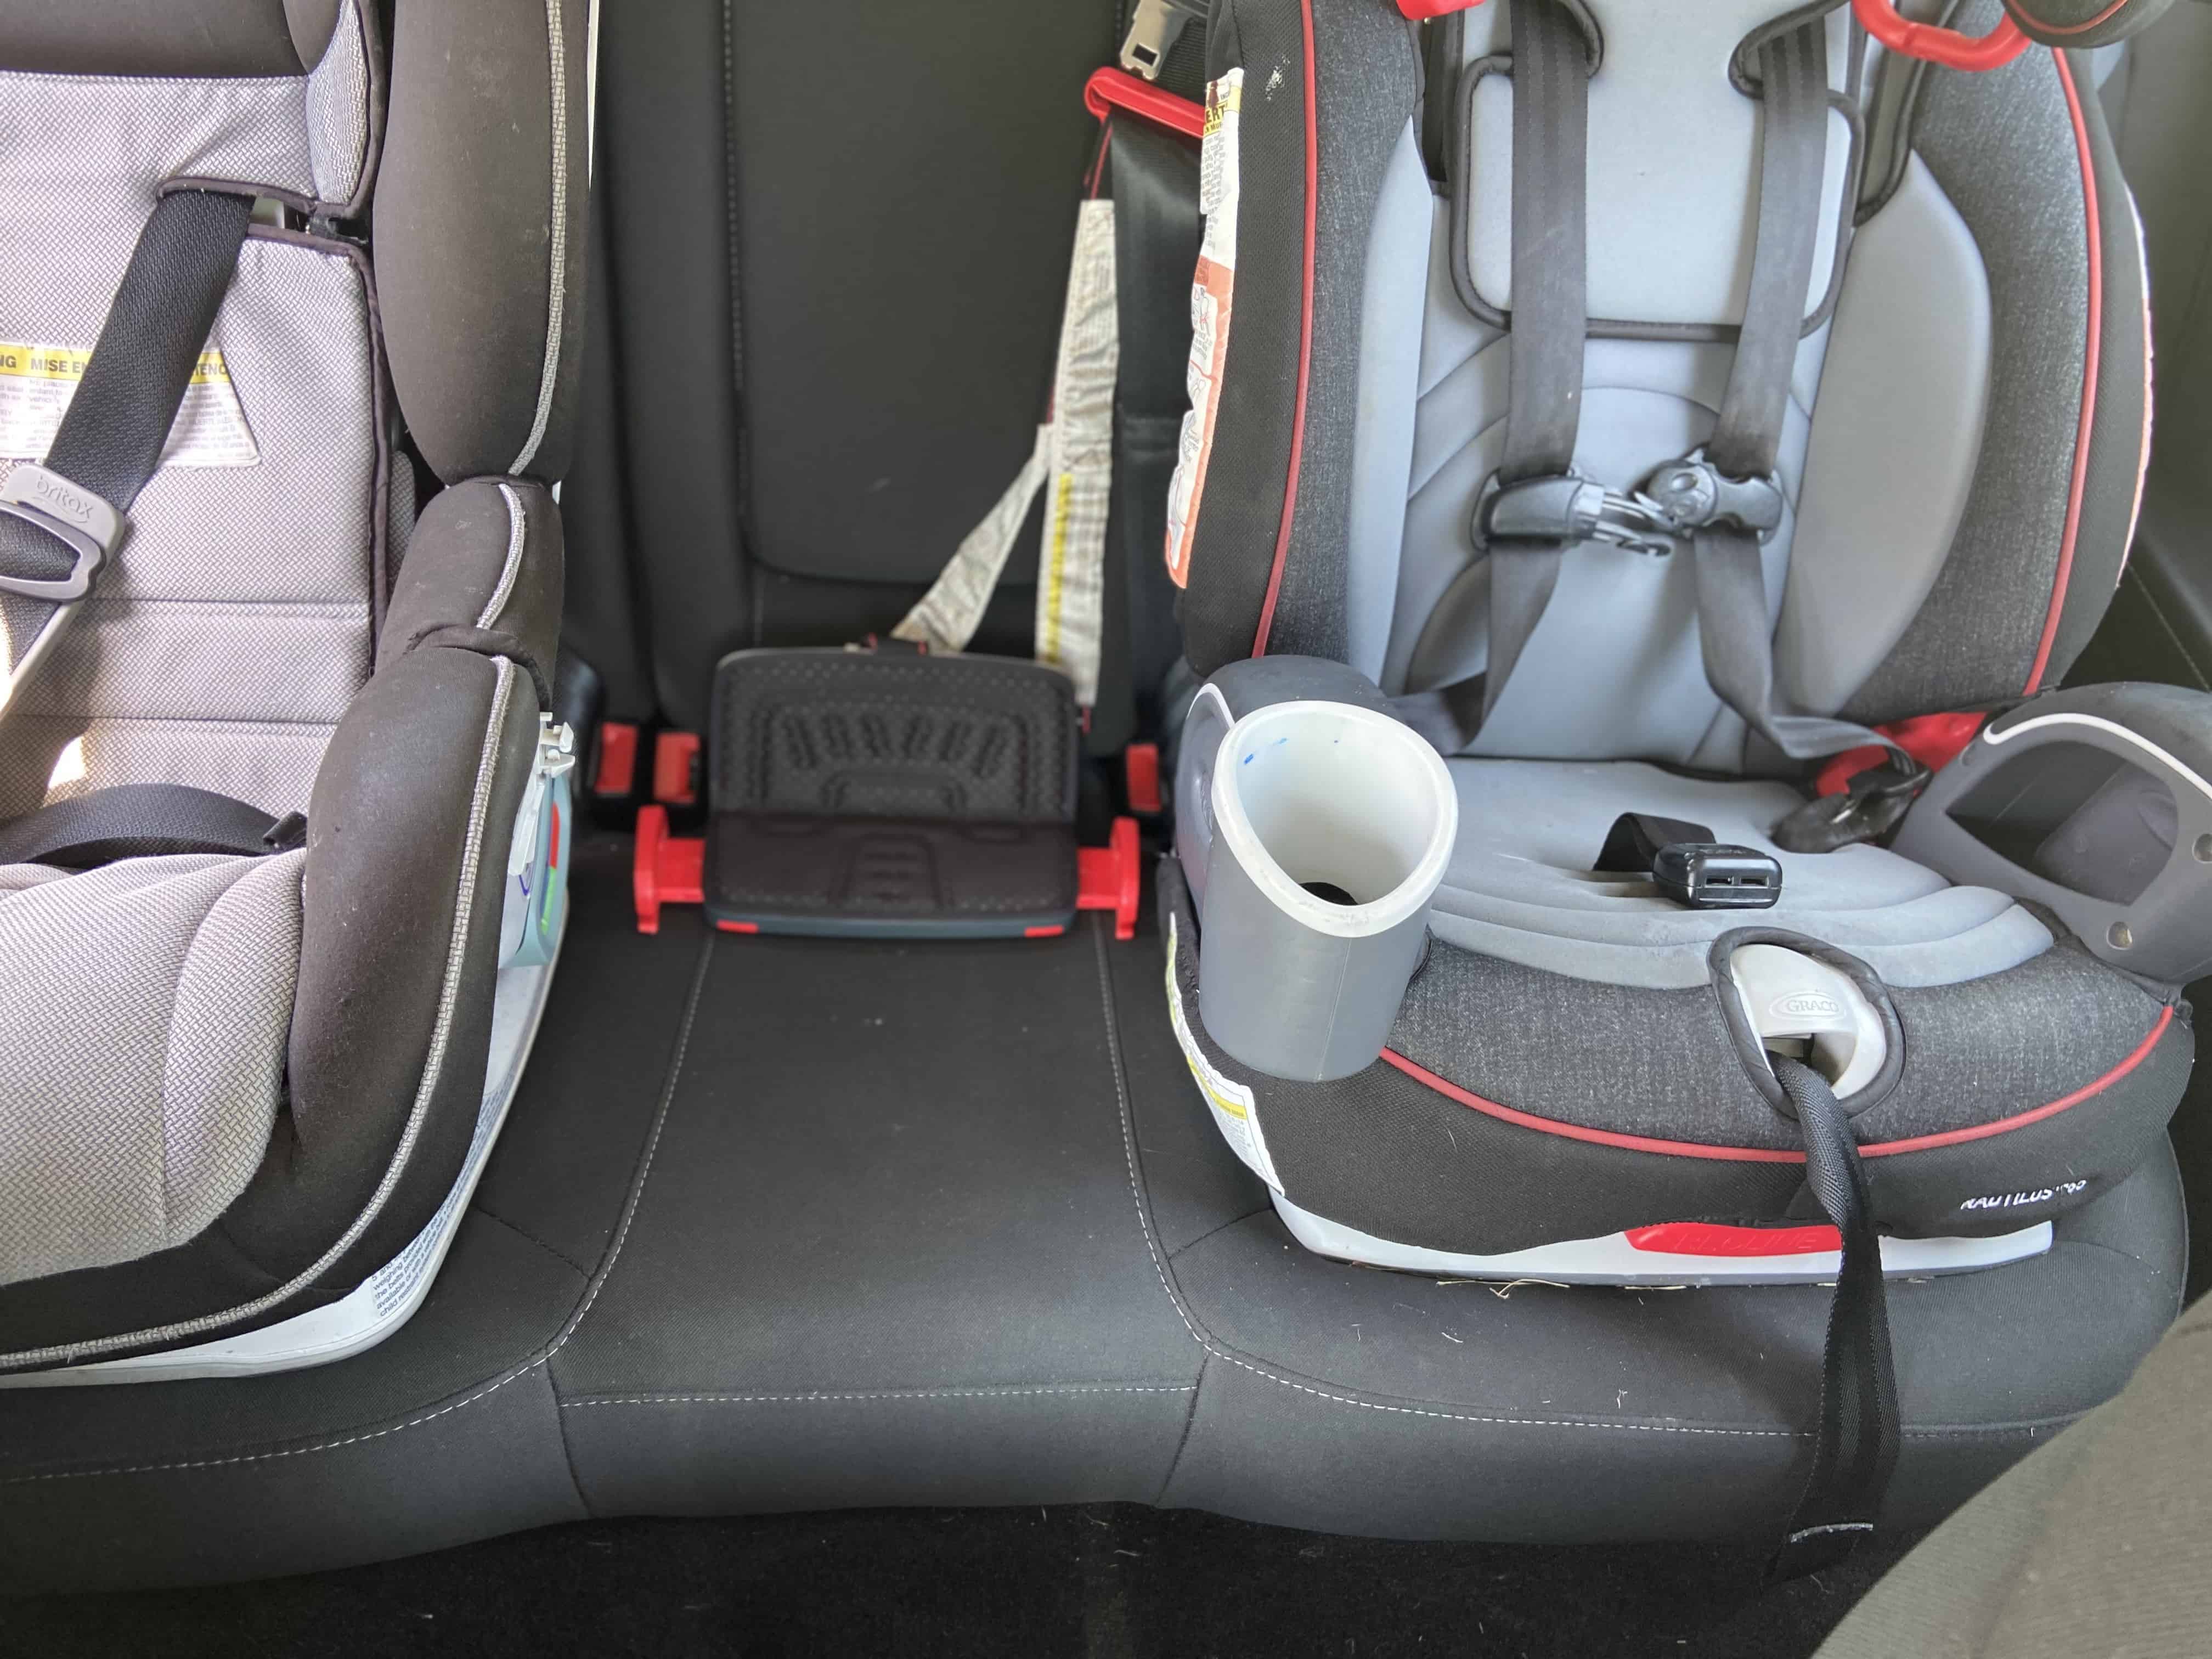 The Mifold easily fits 3 car seats across. 